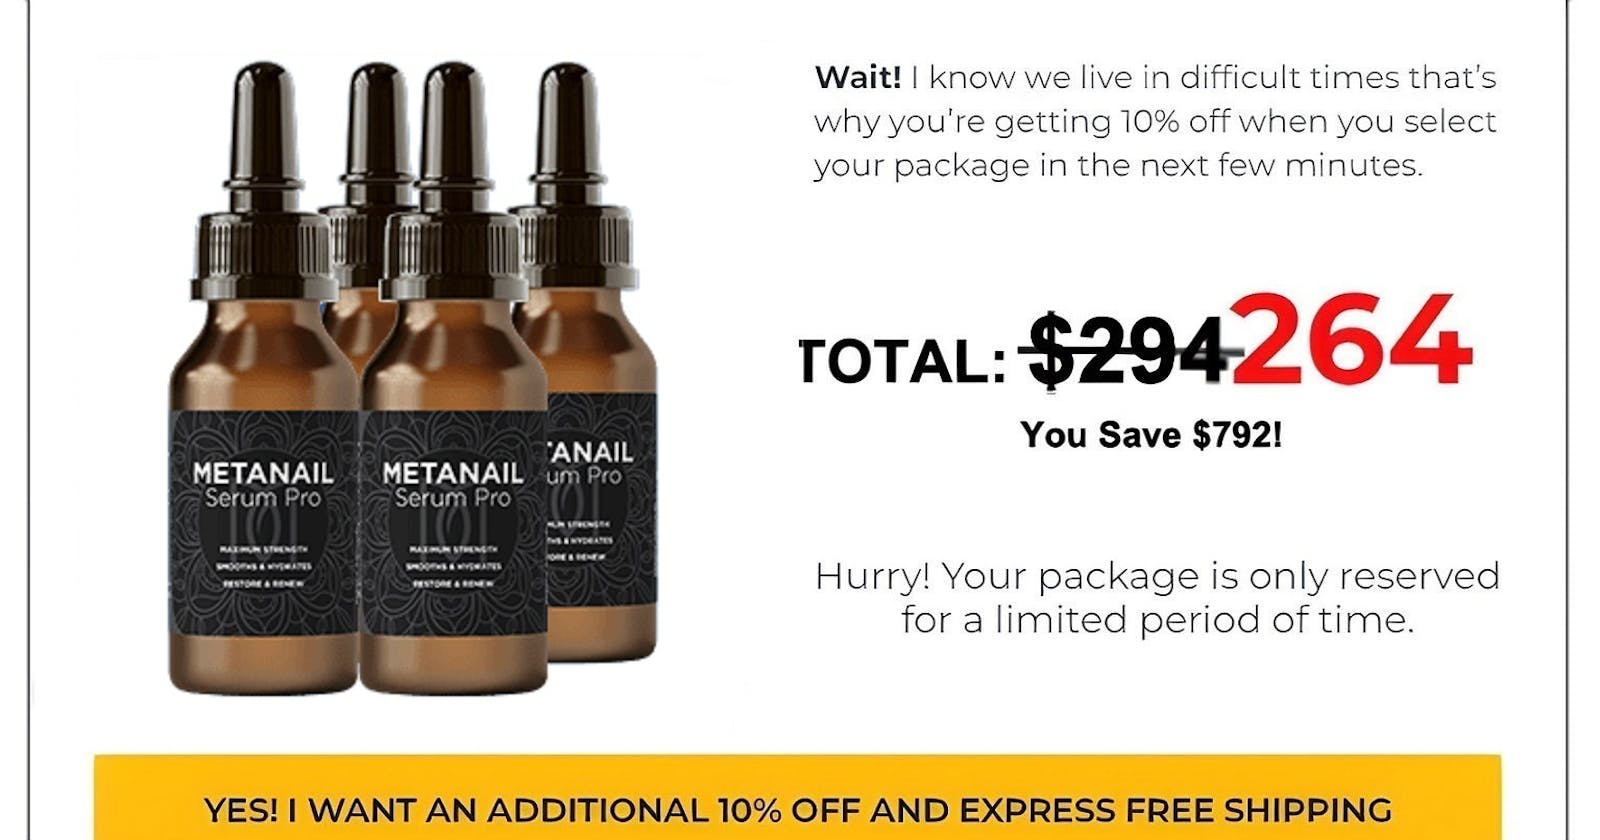 Metanail Serum Pro (Scam Alert) Supports Healthy Nails! Up to 80% OFF